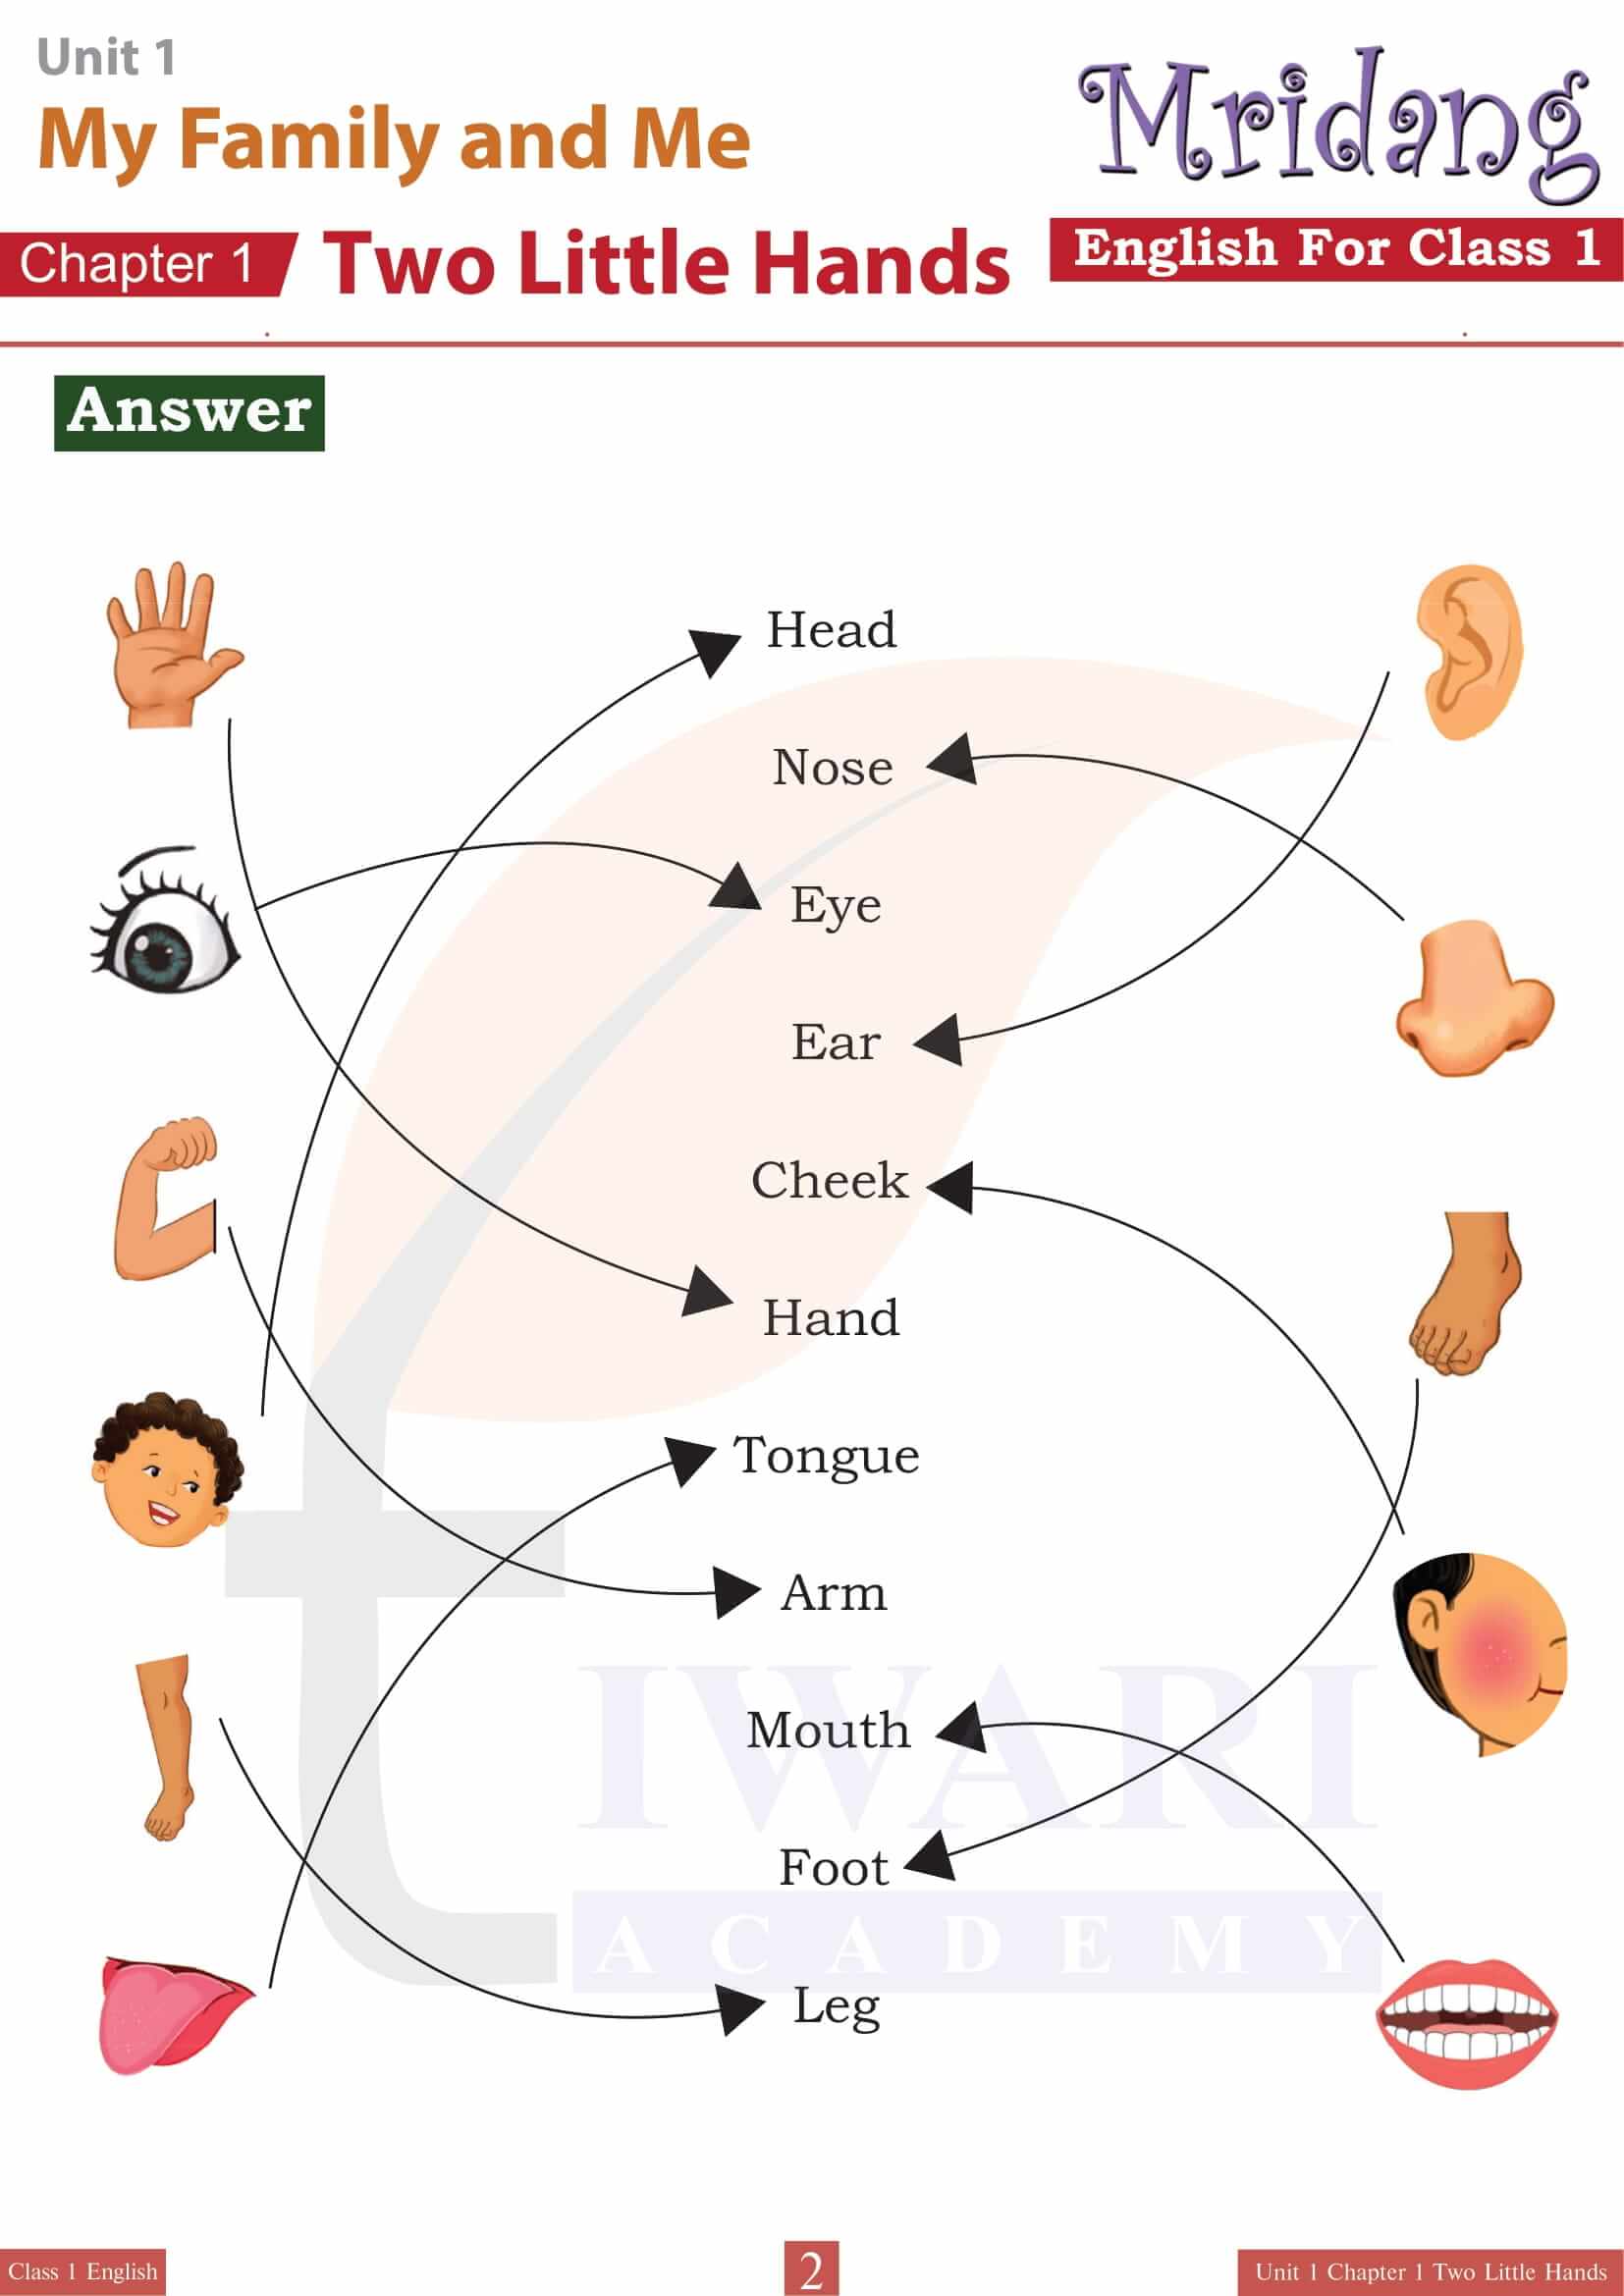 NCERT Solutions for Class 1 English Mridang Chapter 1 Two Little Hands of Unit 1 My Family and Me Answers